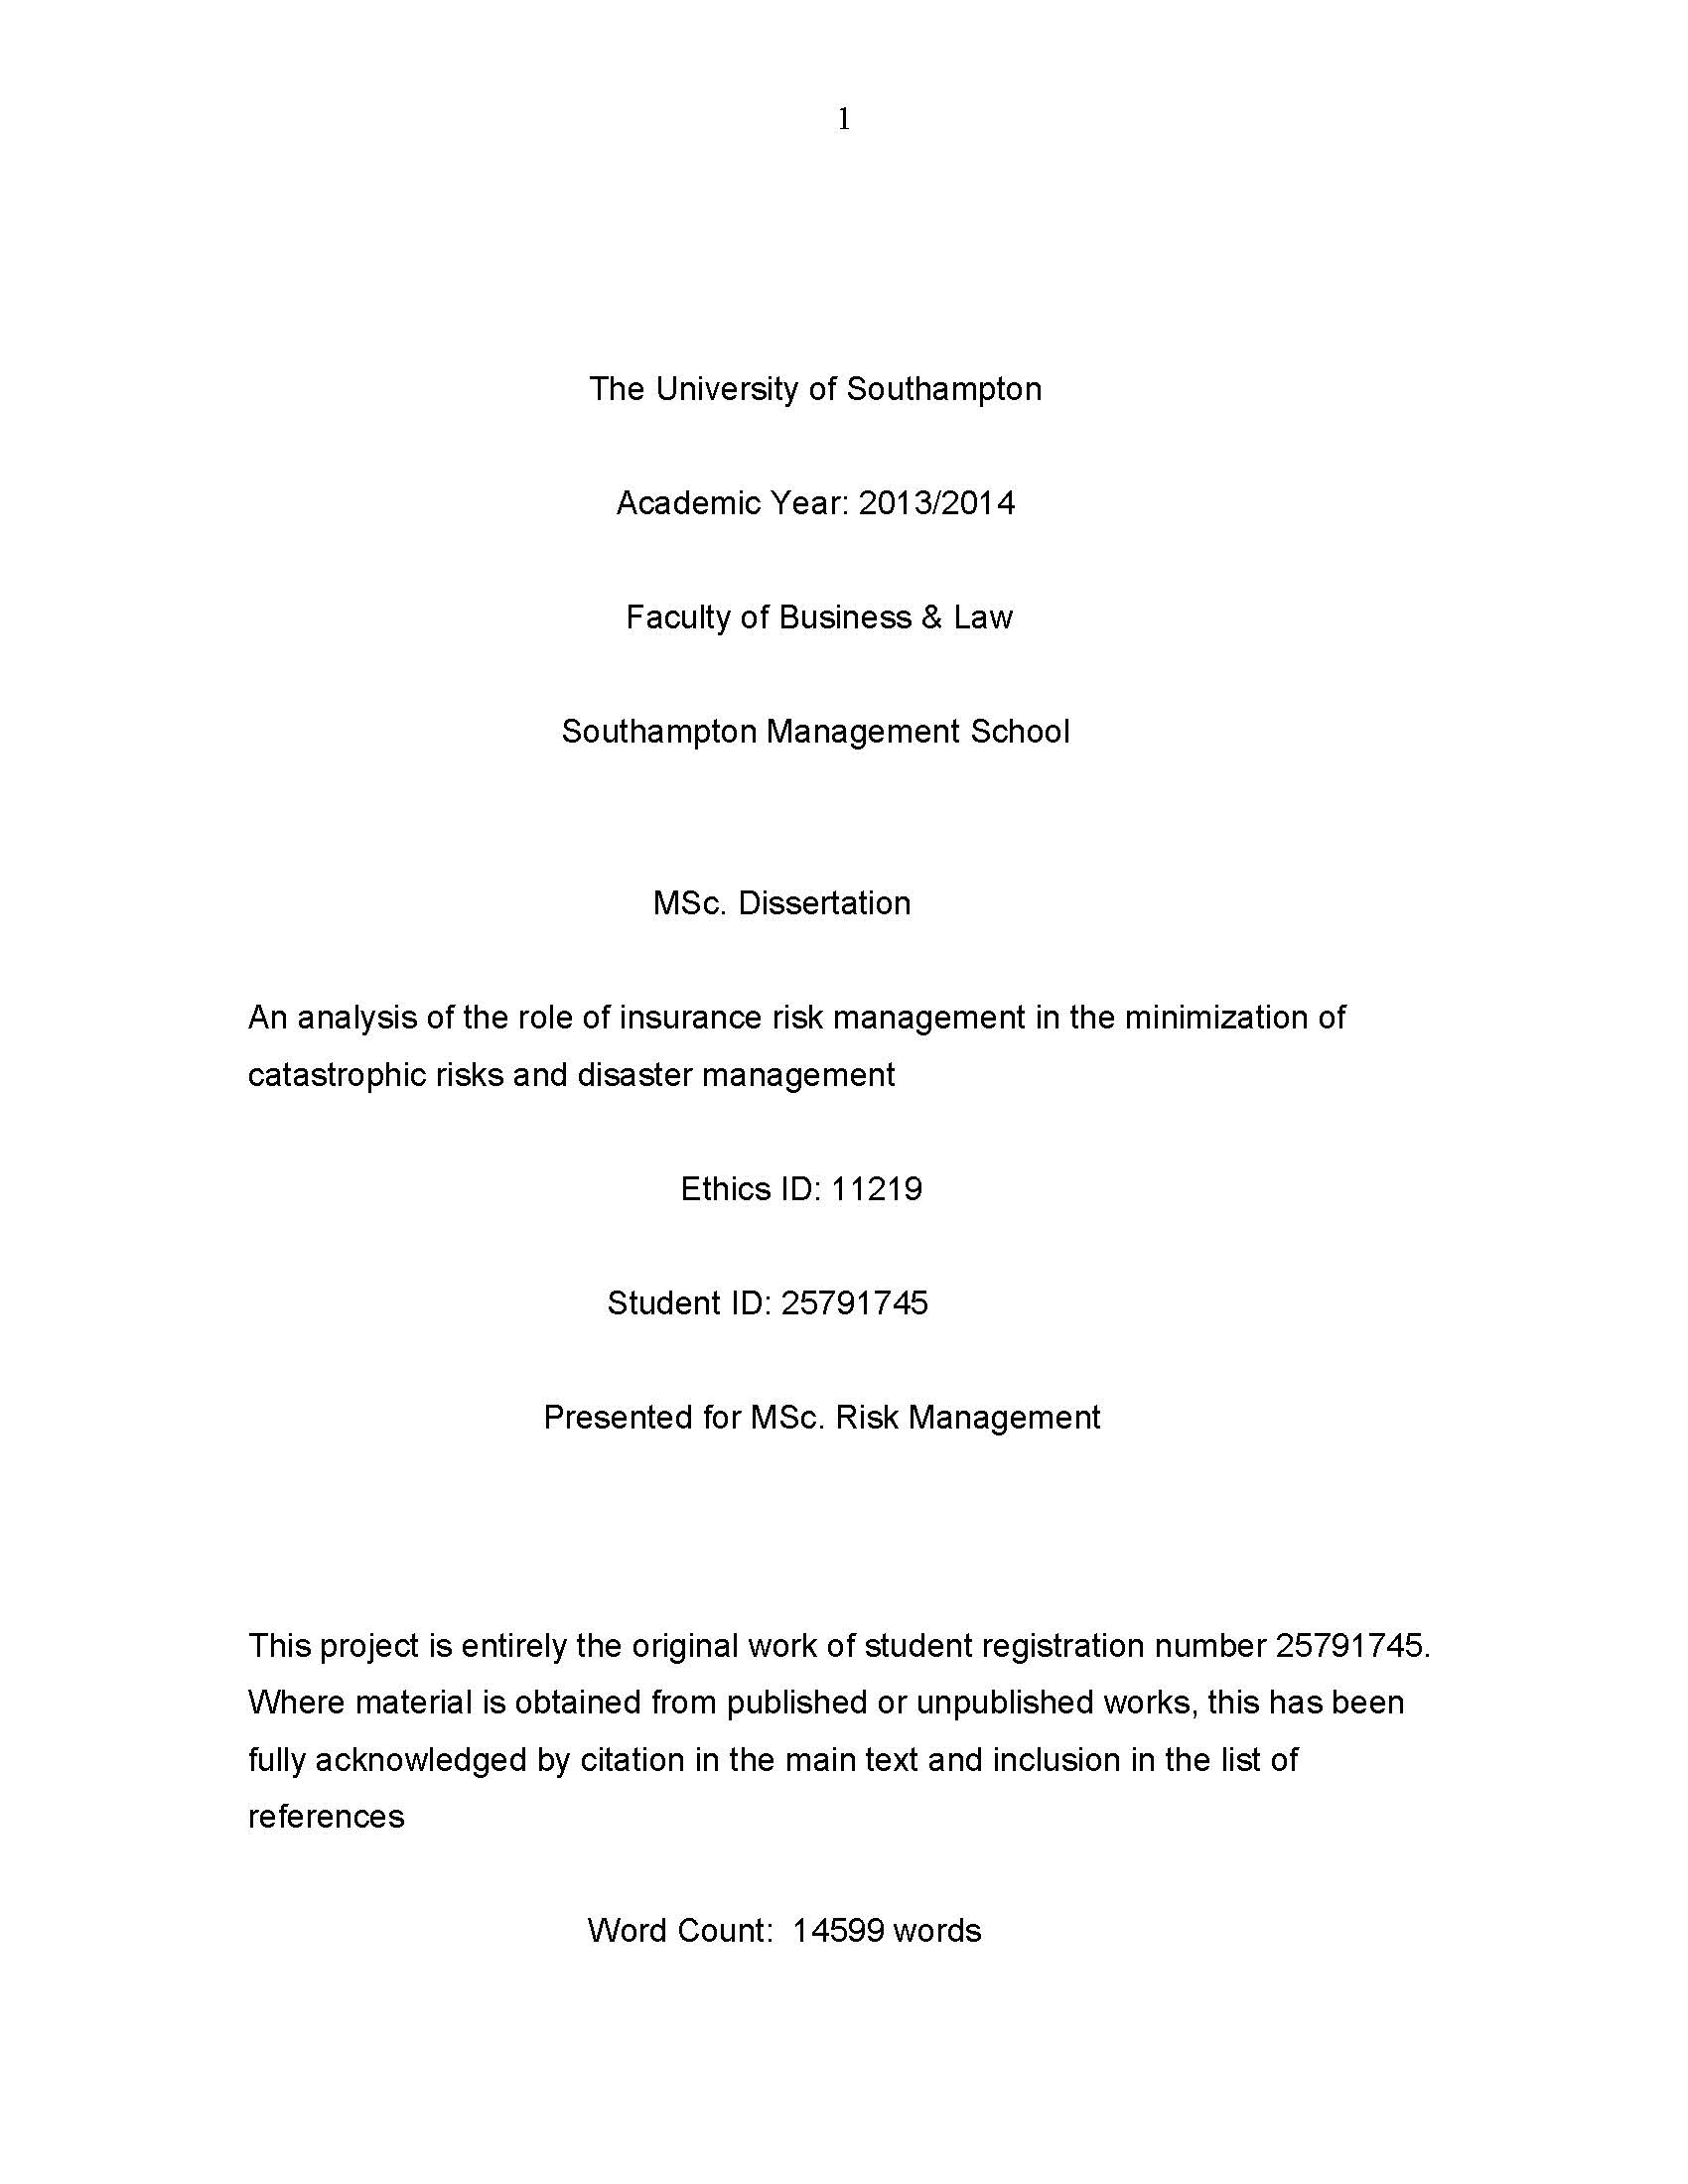 MSc. Dissertation - An analysis of the role of insurance risk management in the minimization of catastrophic risks and disaster management